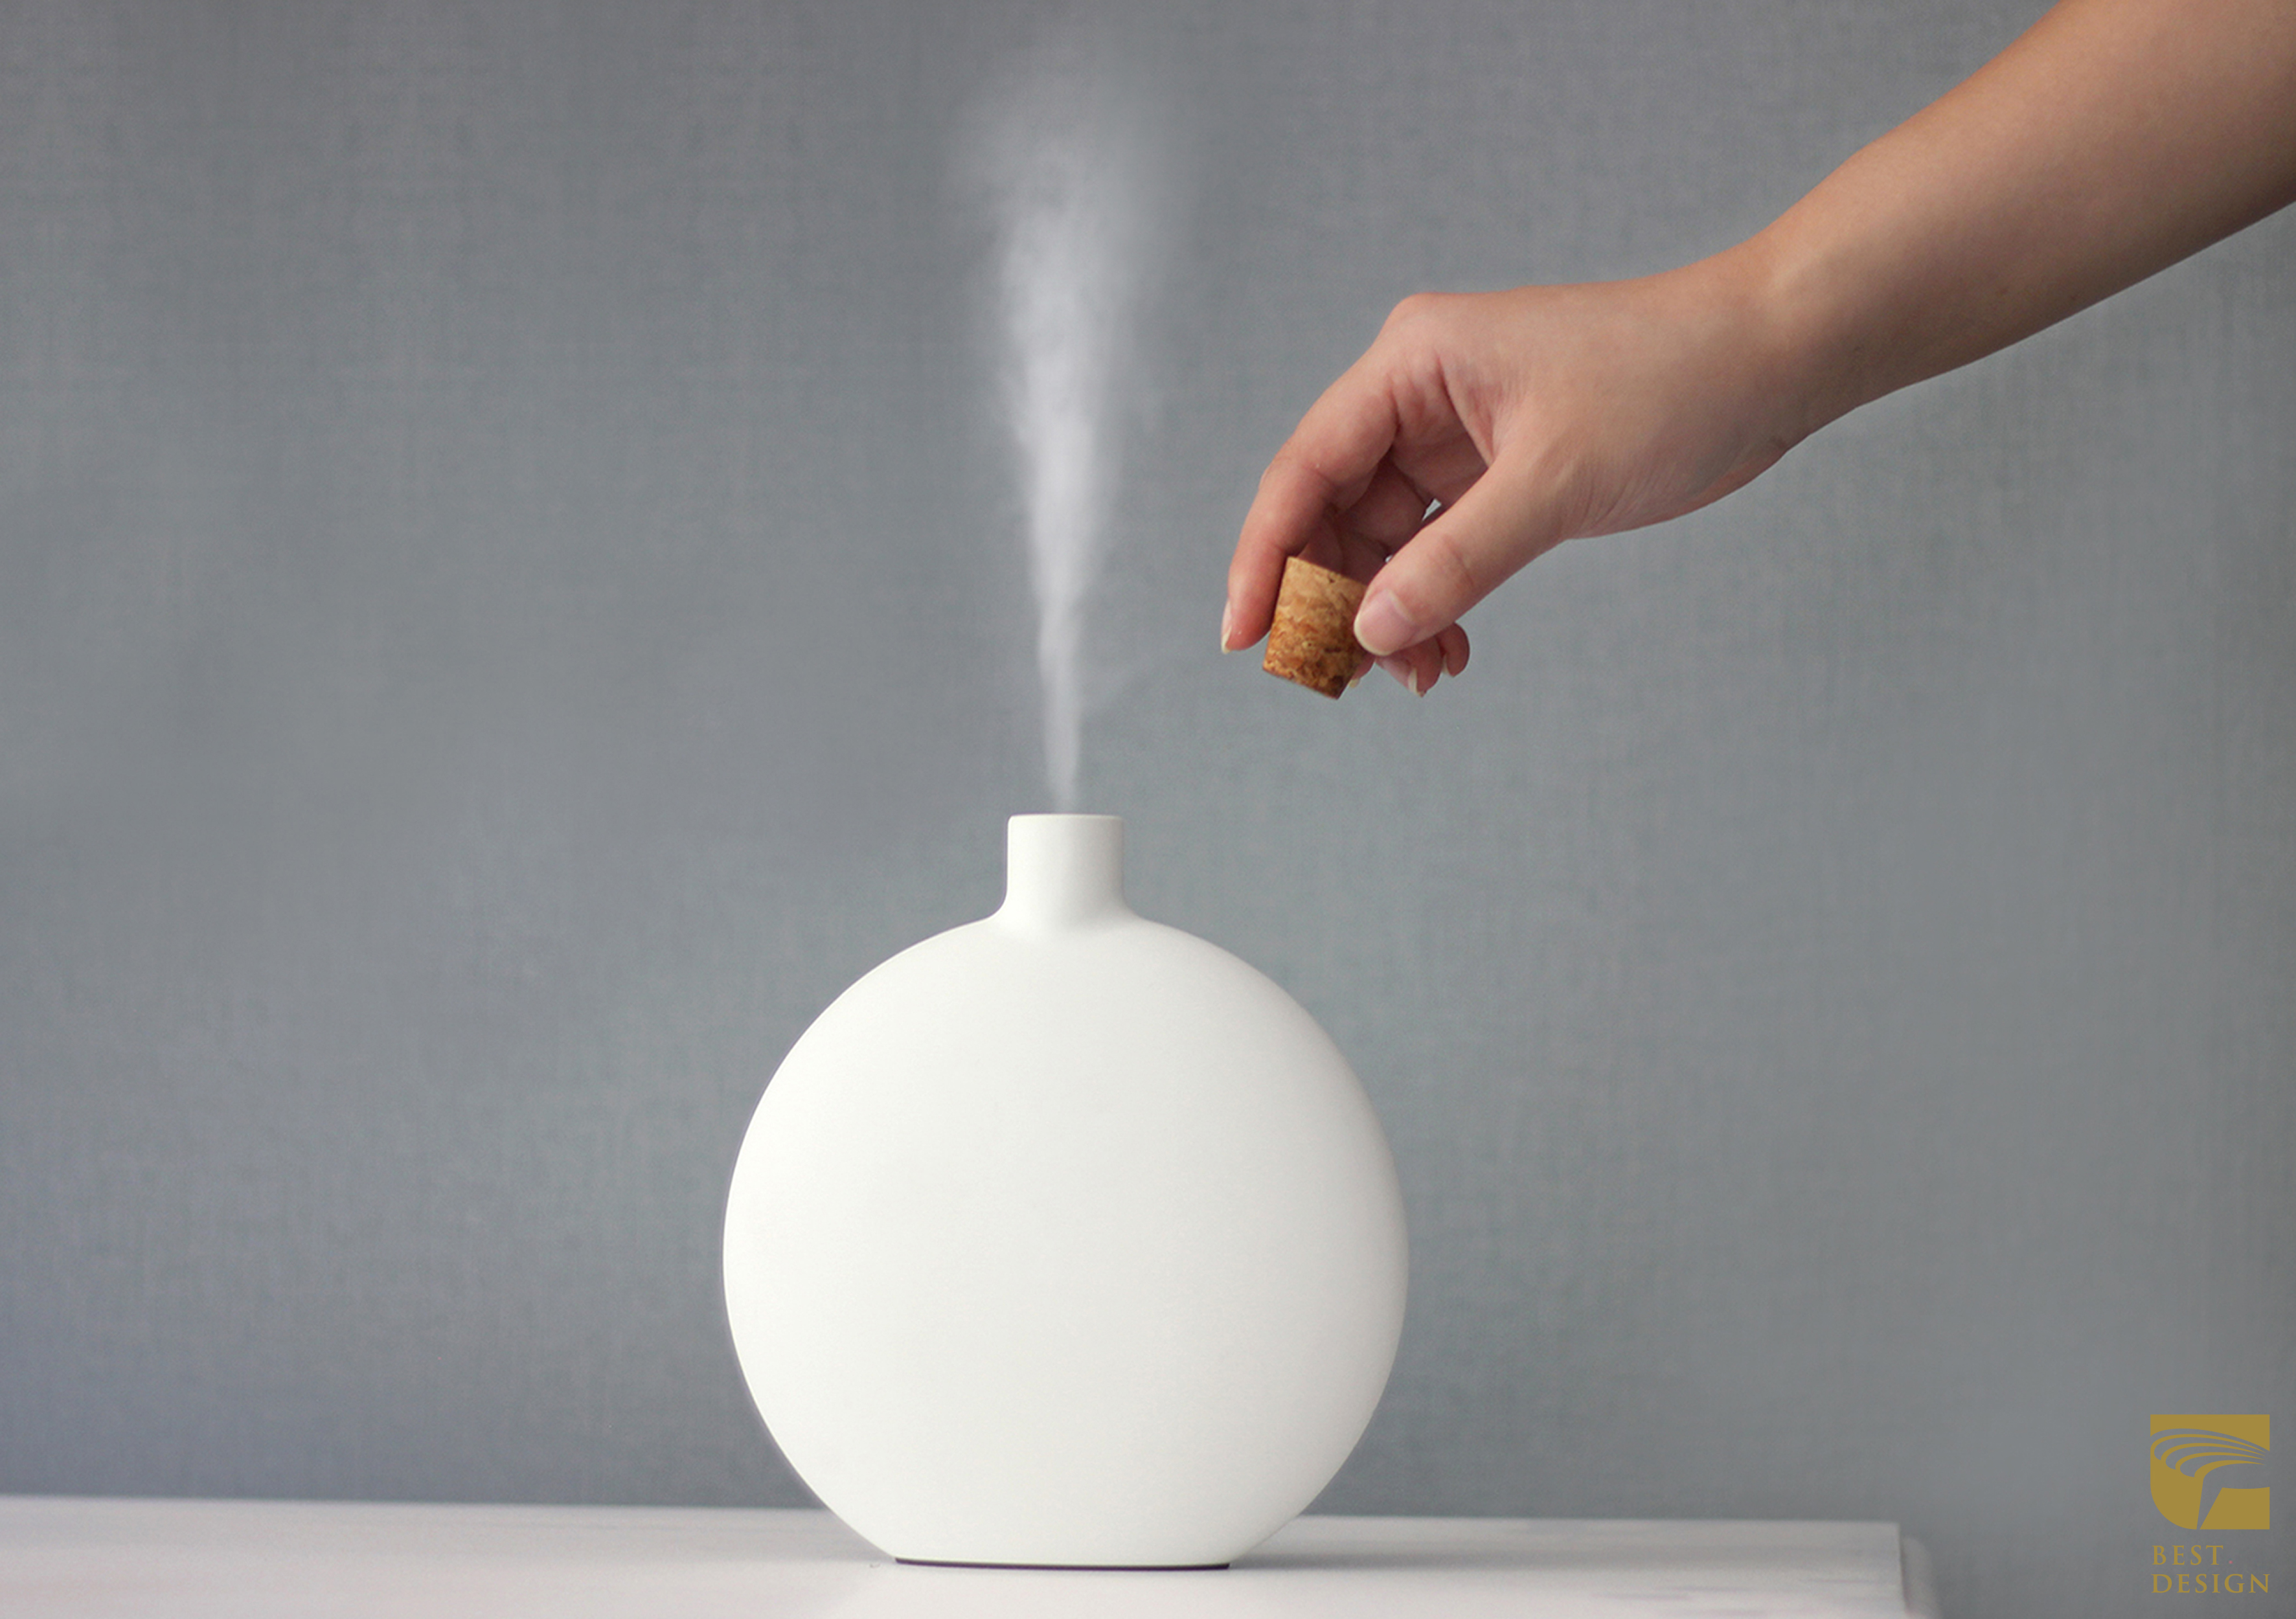 All-Iris Aroma Humidifier by Shenzhen Stylepie Lifestyle Co. Ltd, Image courtesy of Golden Pin Design Awards